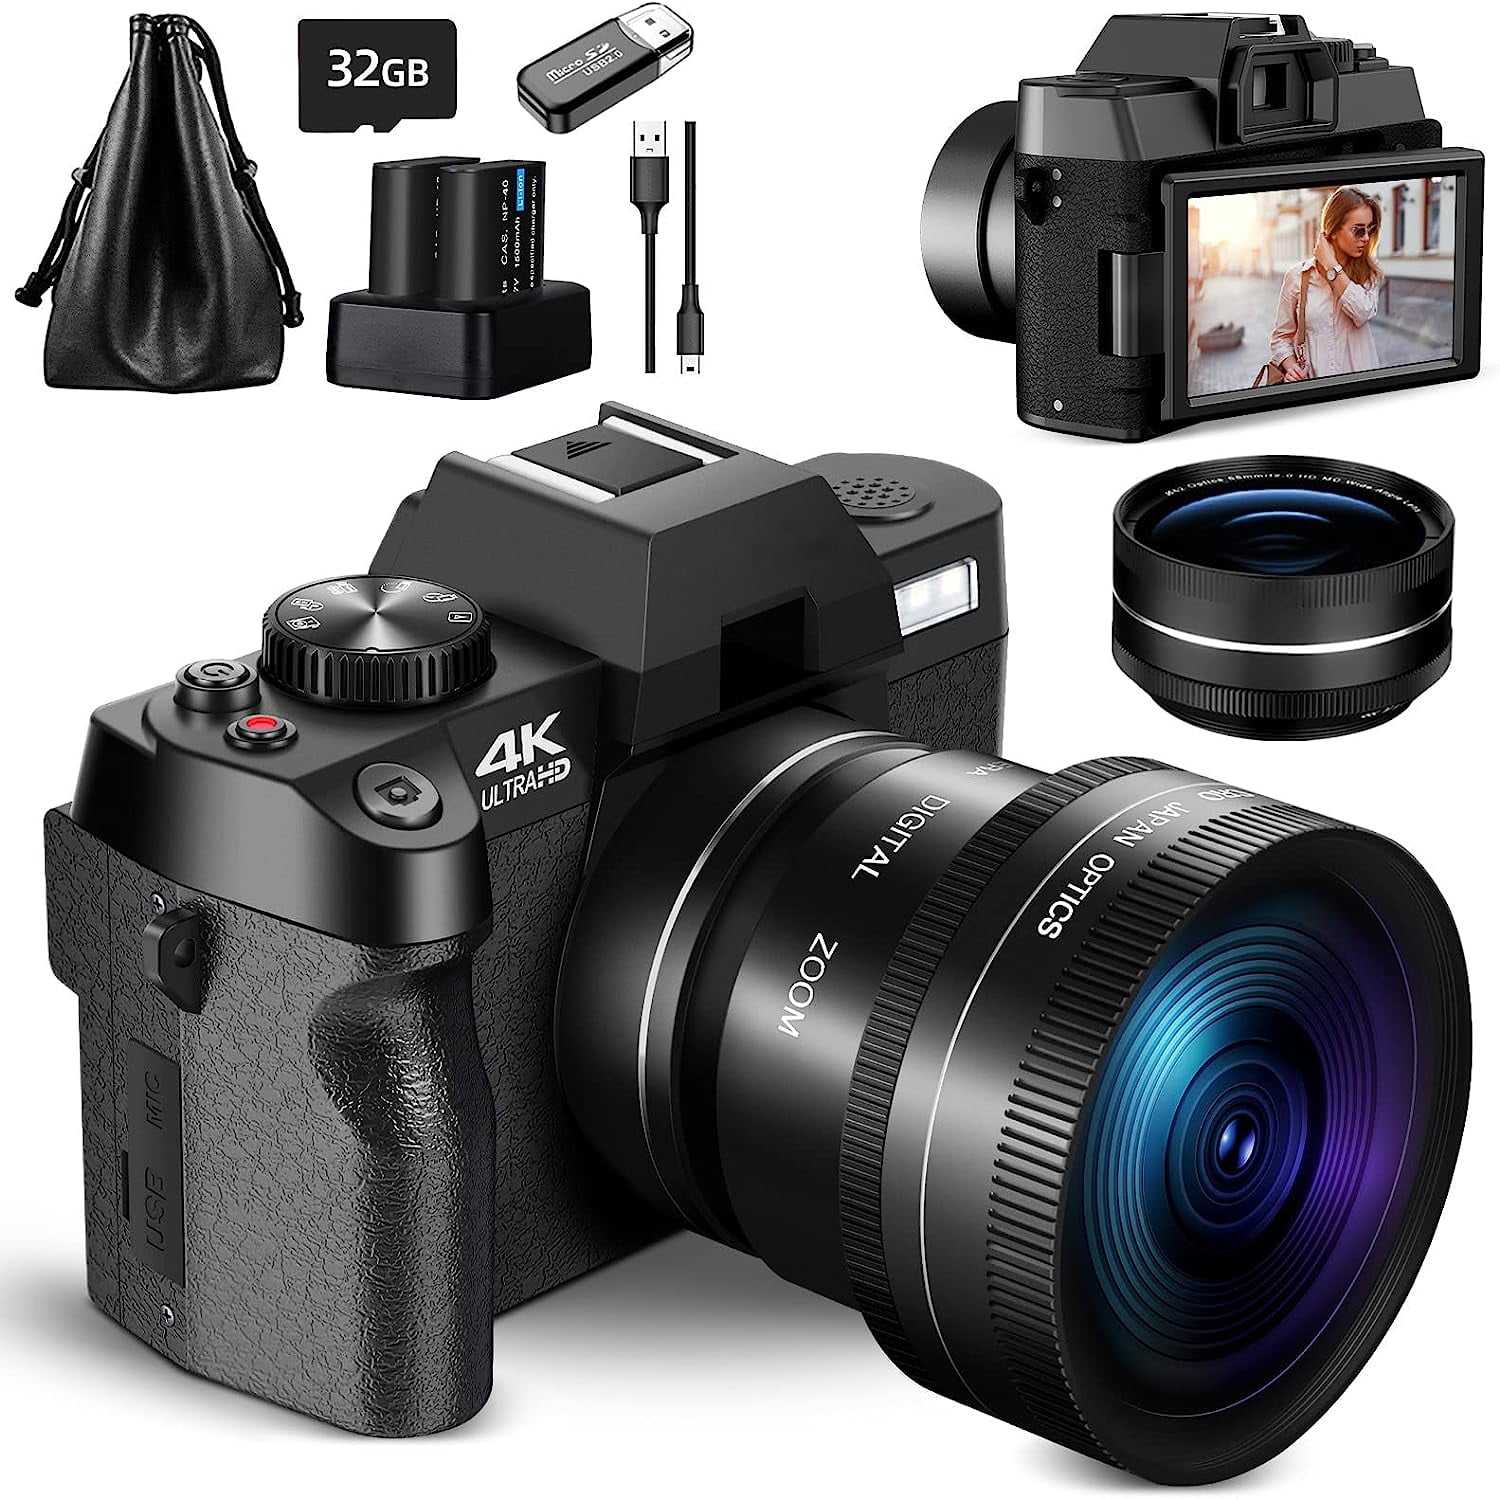 NBD Digital Camera 4K Ultra HD 48MP All-in-One Vlogging Camera with Wide Angle Lens, Digital Zoom